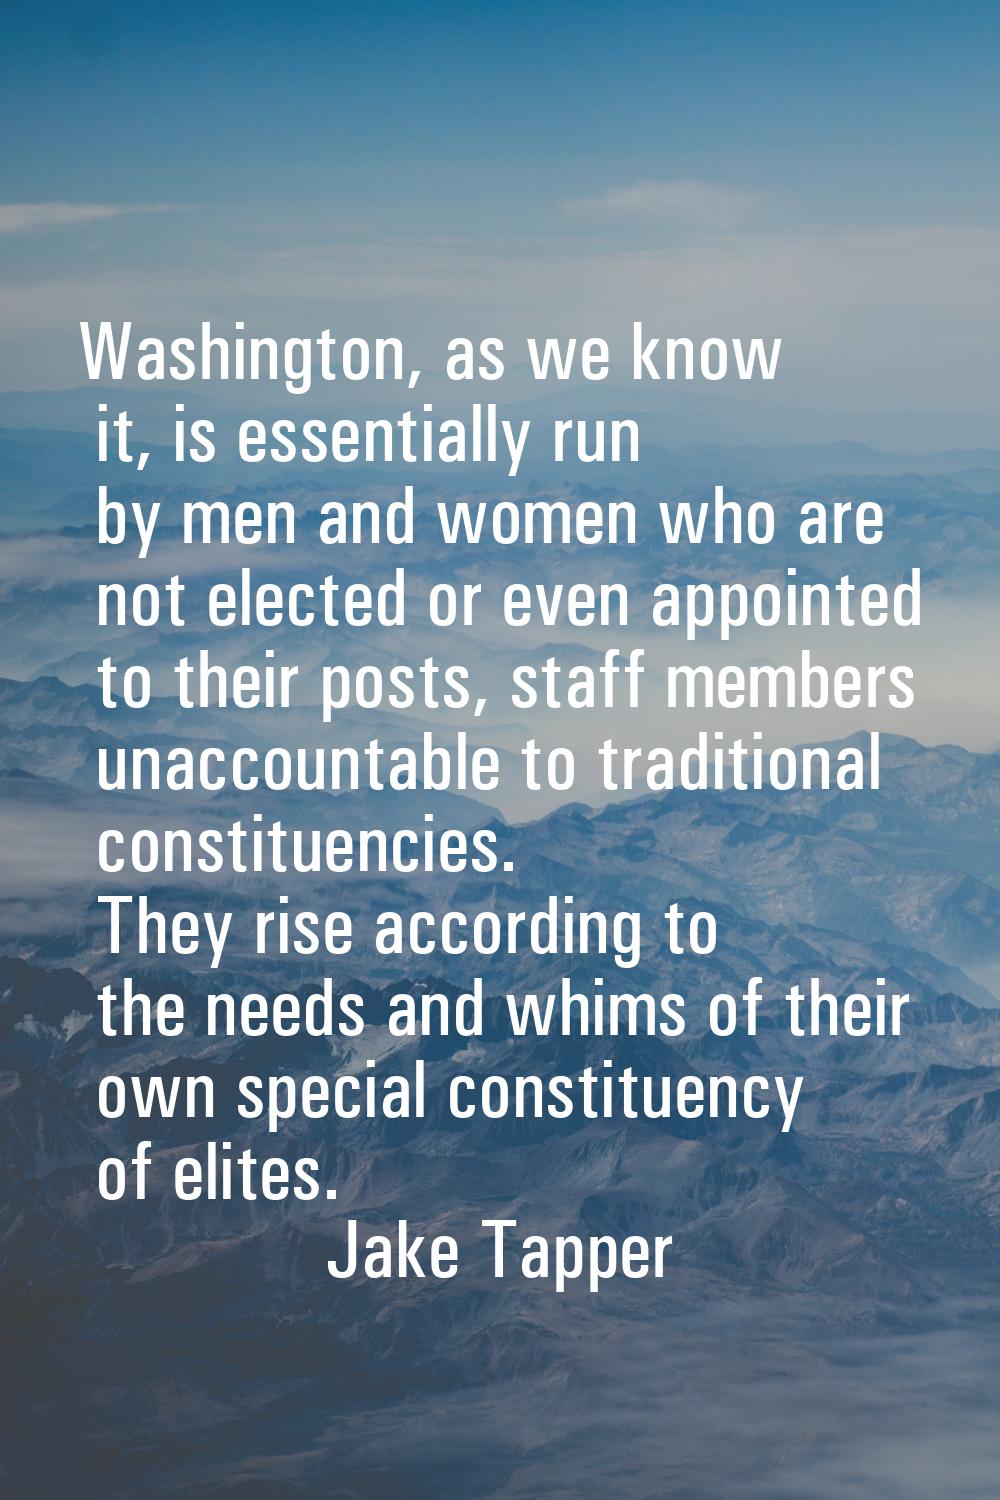 Washington, as we know it, is essentially run by men and women who are not elected or even appointe